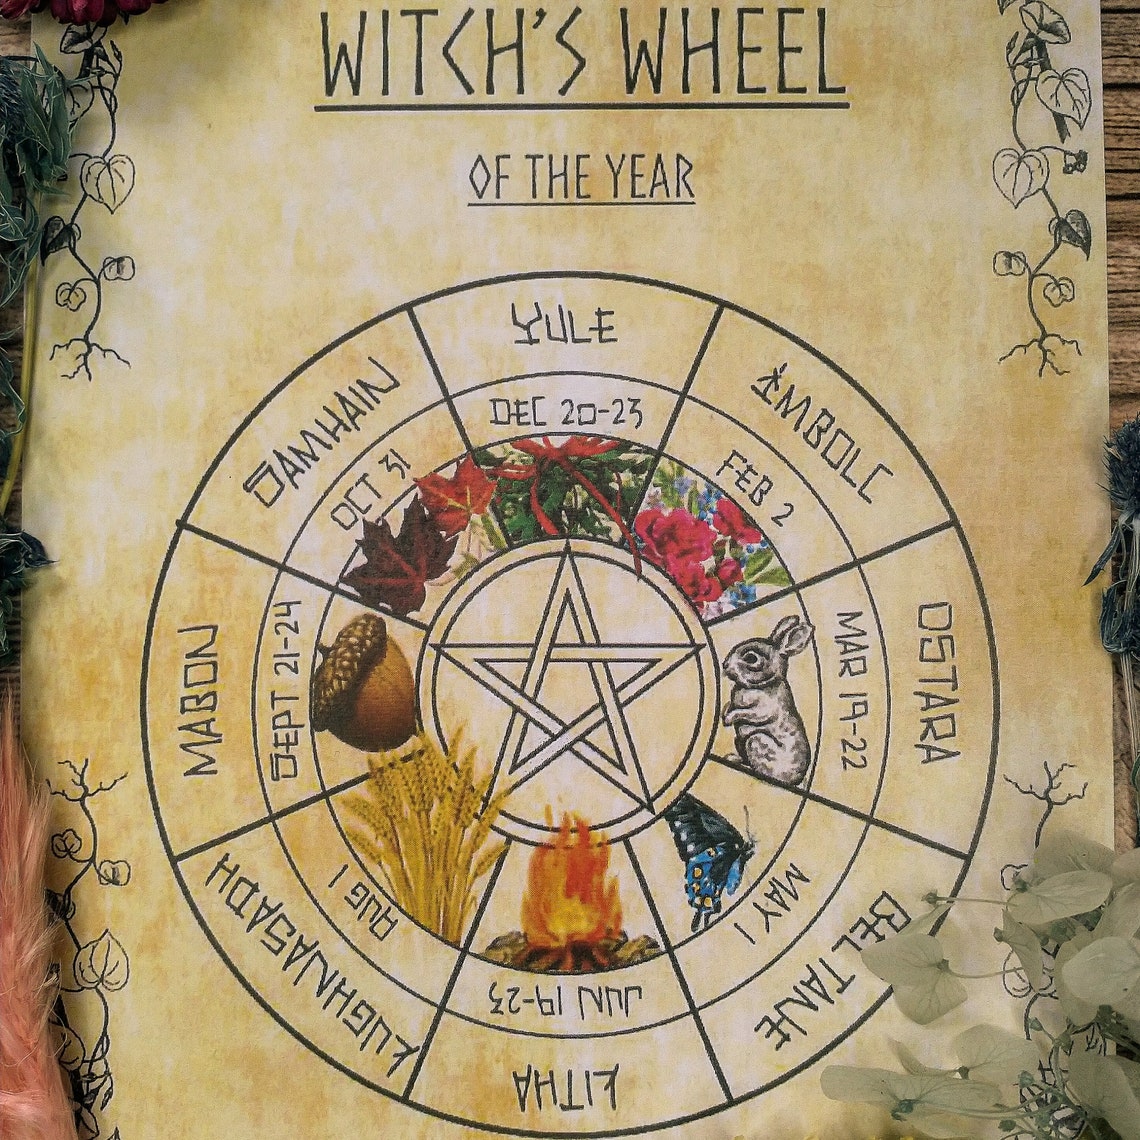 Witch Wheel of the Year Digital Grimoire Page Book of Etsy UK